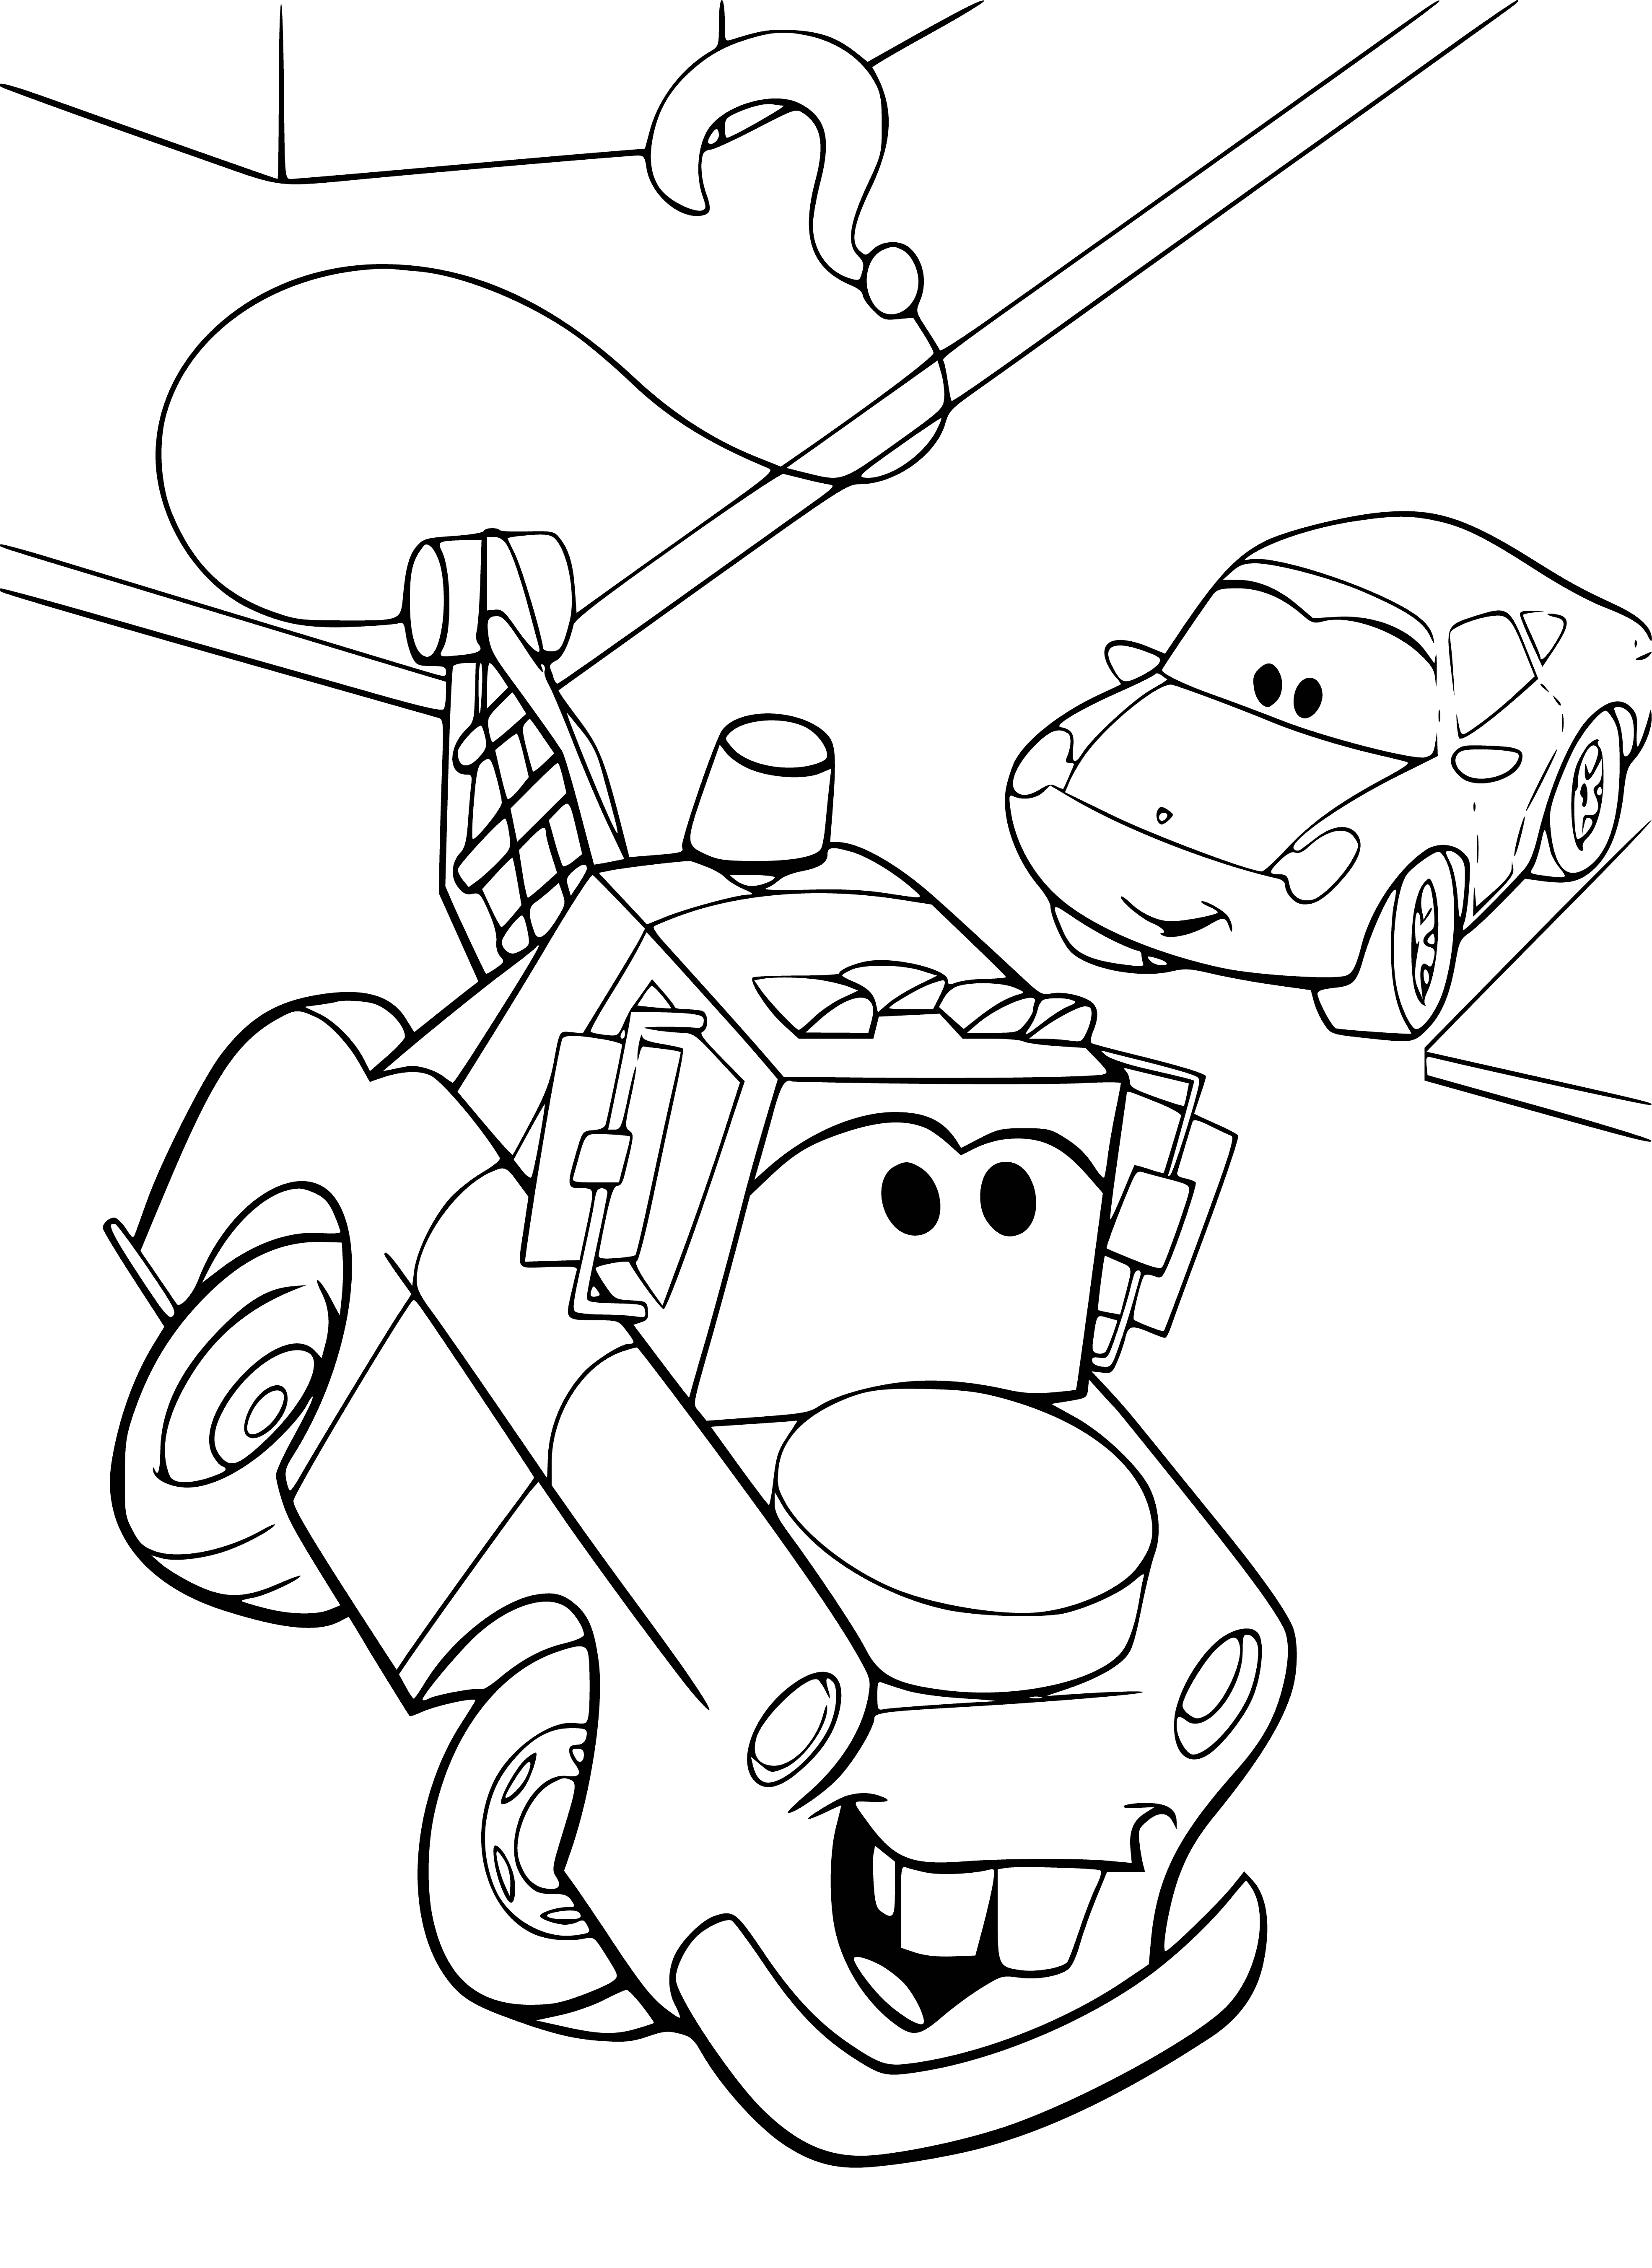 coloring page: Large red car with yellow stripes & 8 smaller cars around it. Word "Cars" & "Friends of Lightning McQueen" written underneath. #coloringpages